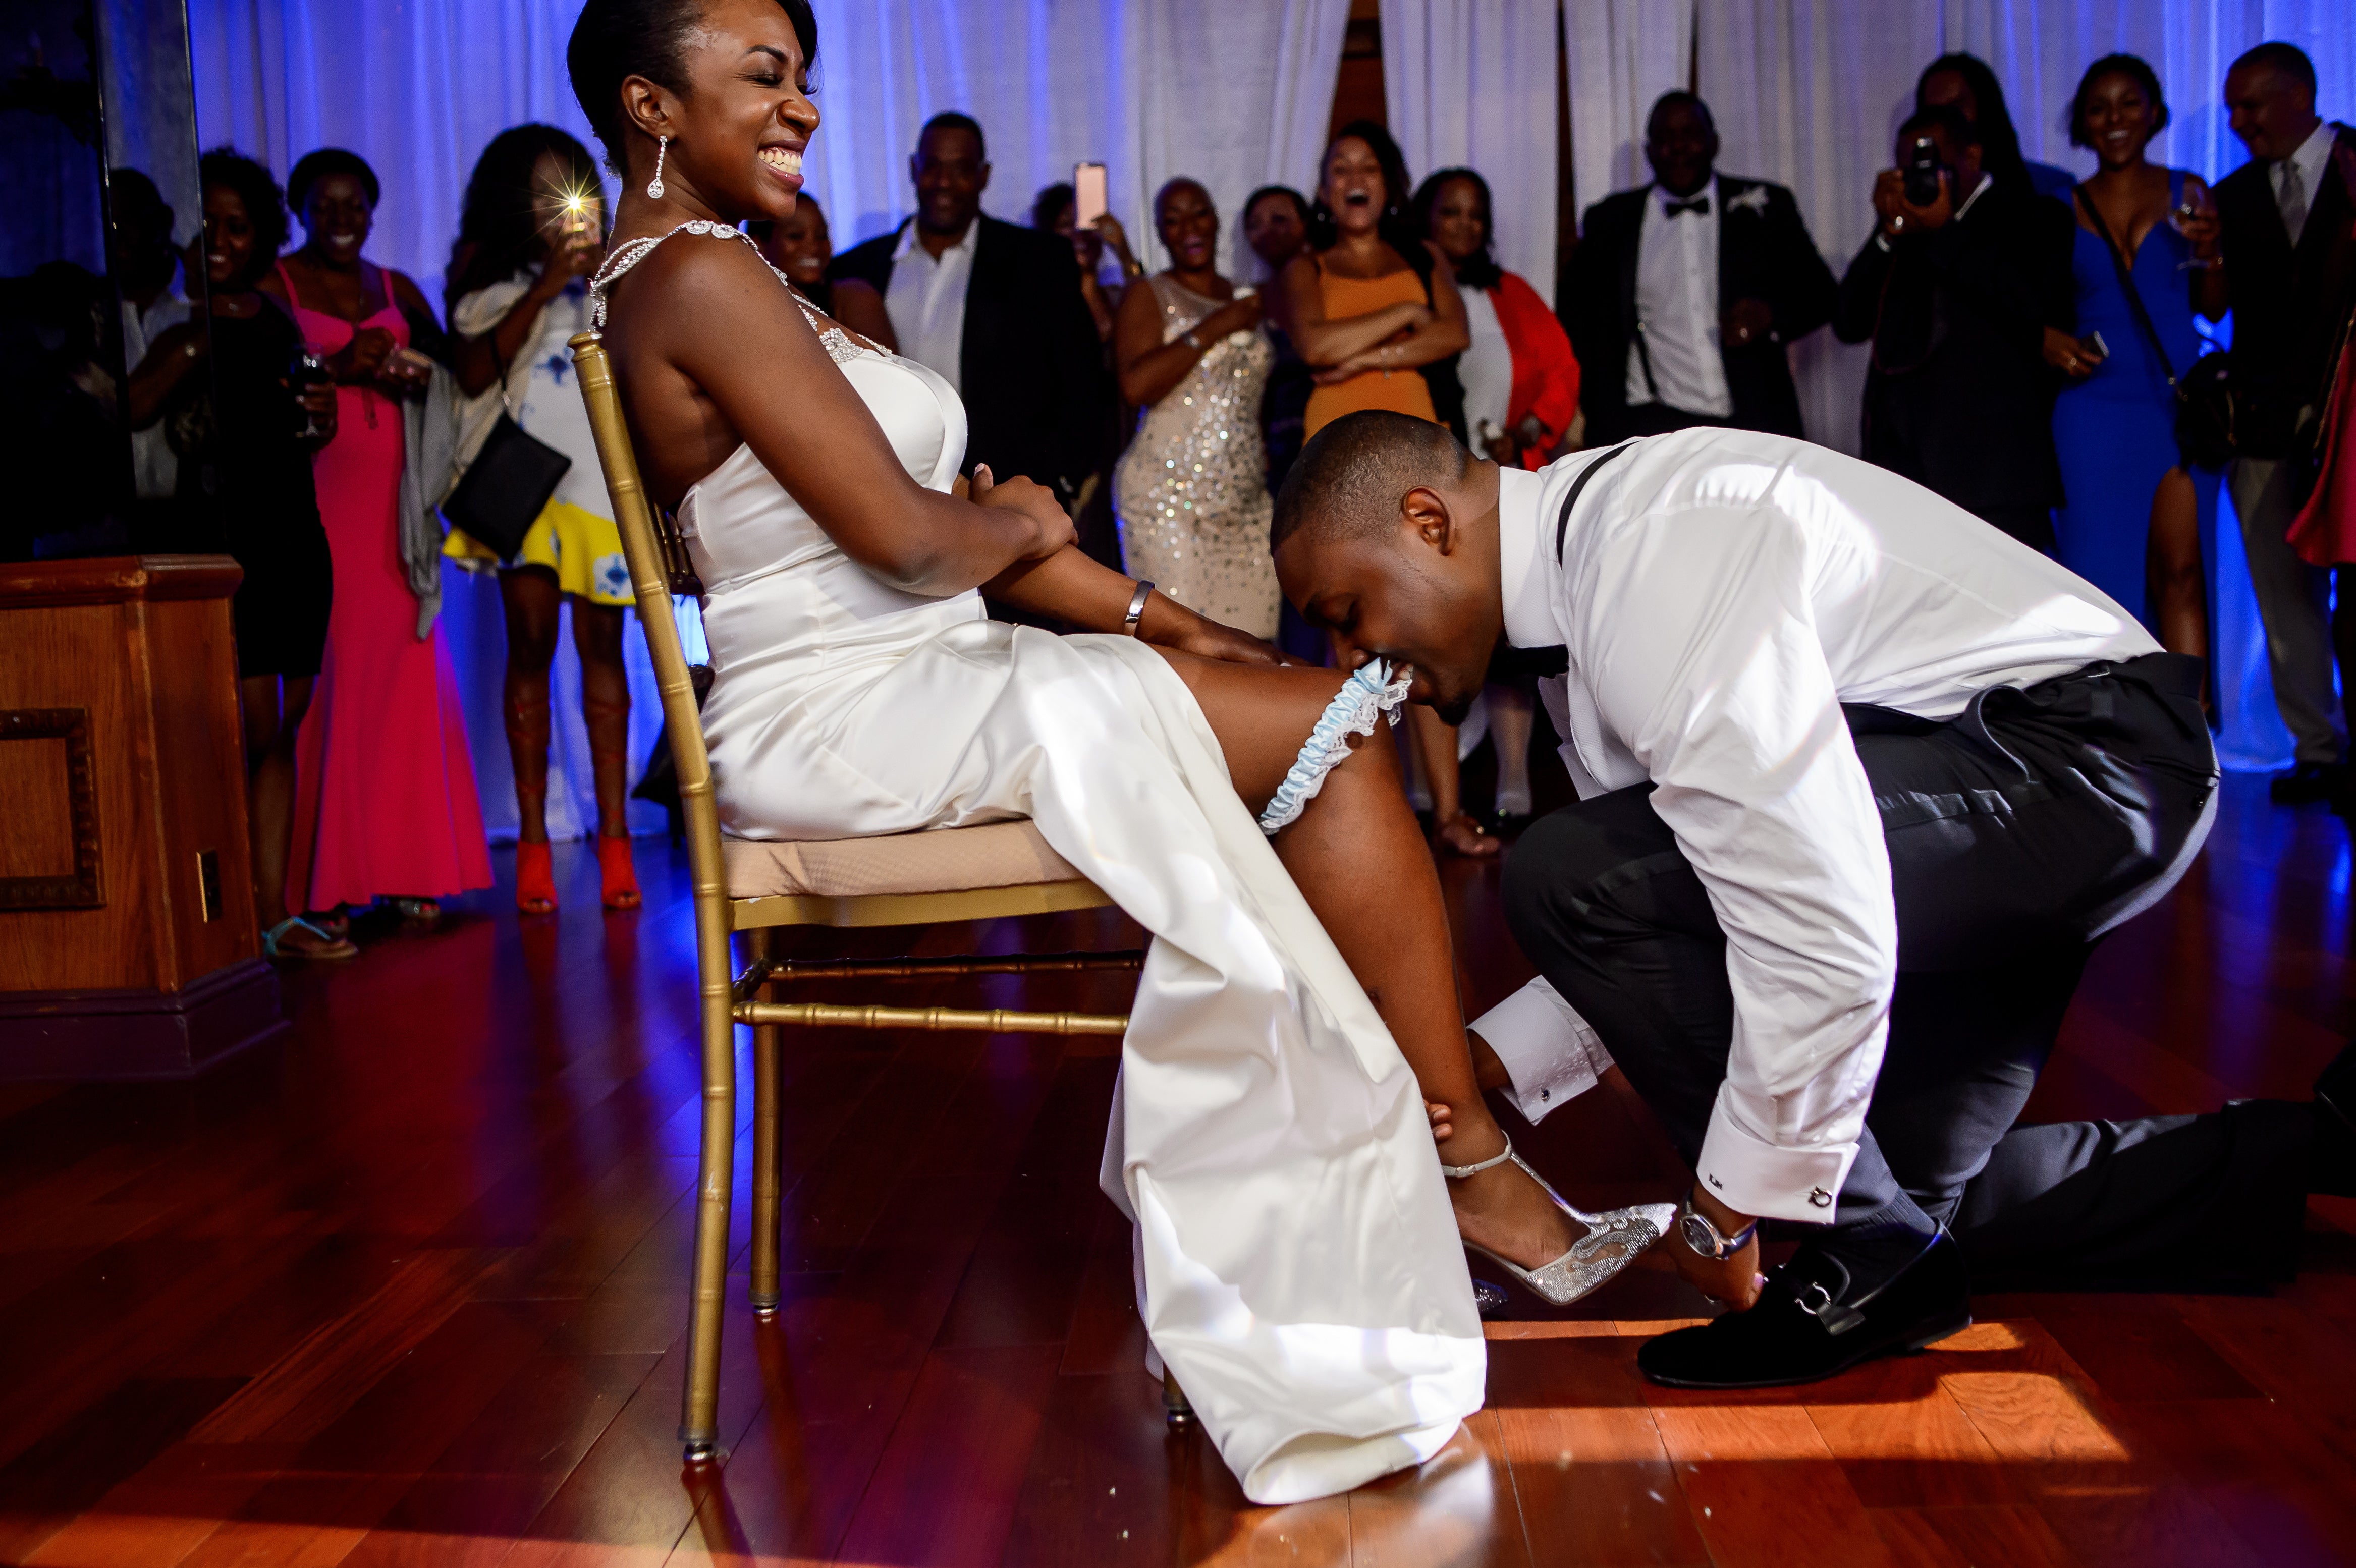 Bridal Bliss: Kareem and Latresse's Modern Wedding Was The Sweetest Thing
